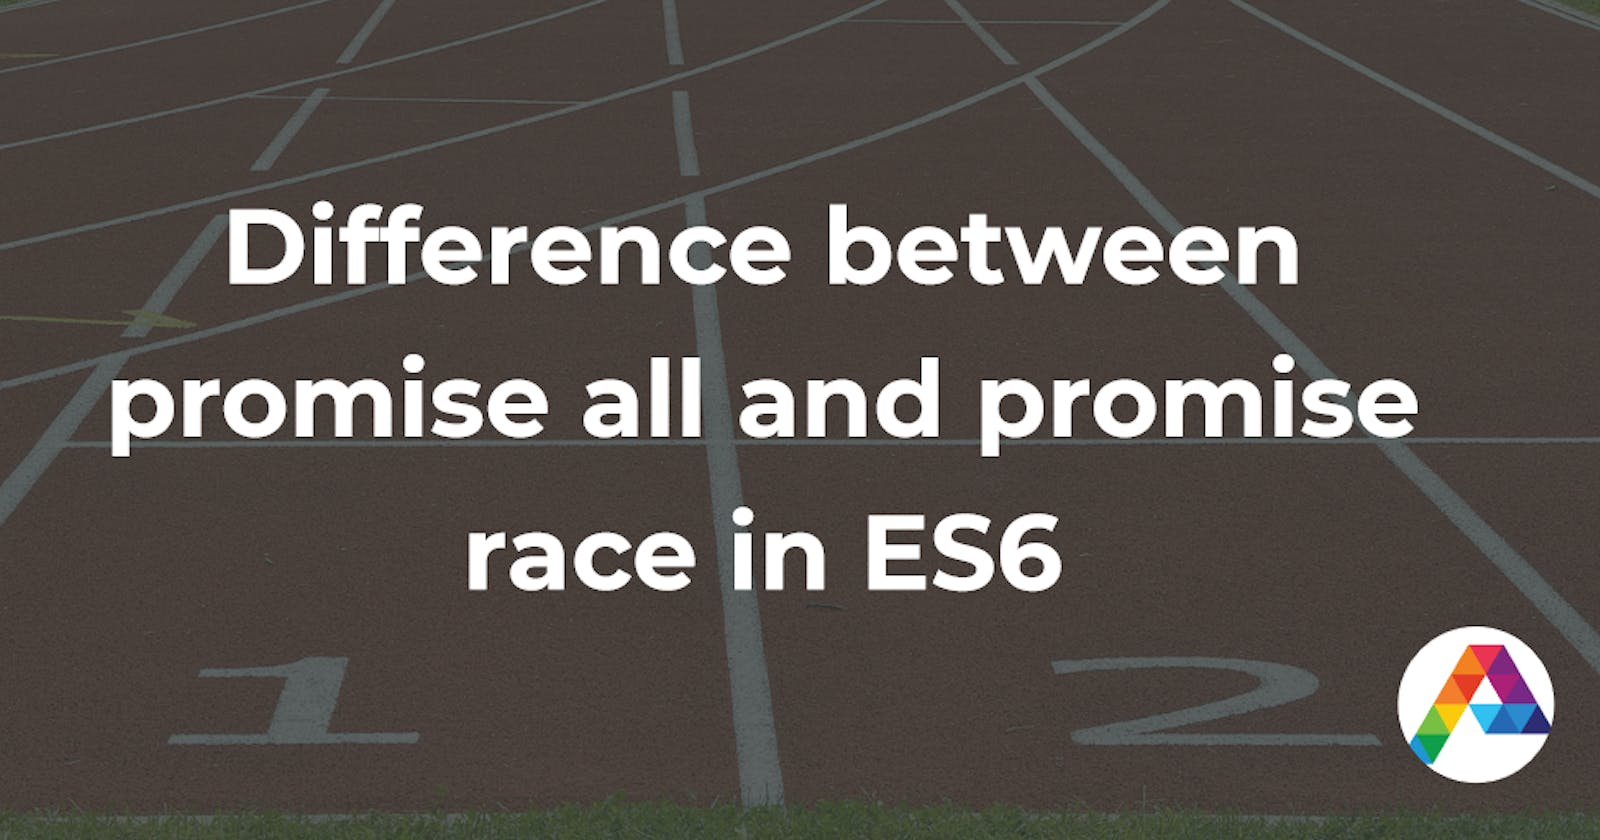 Difference between promise all and promise race in ES6